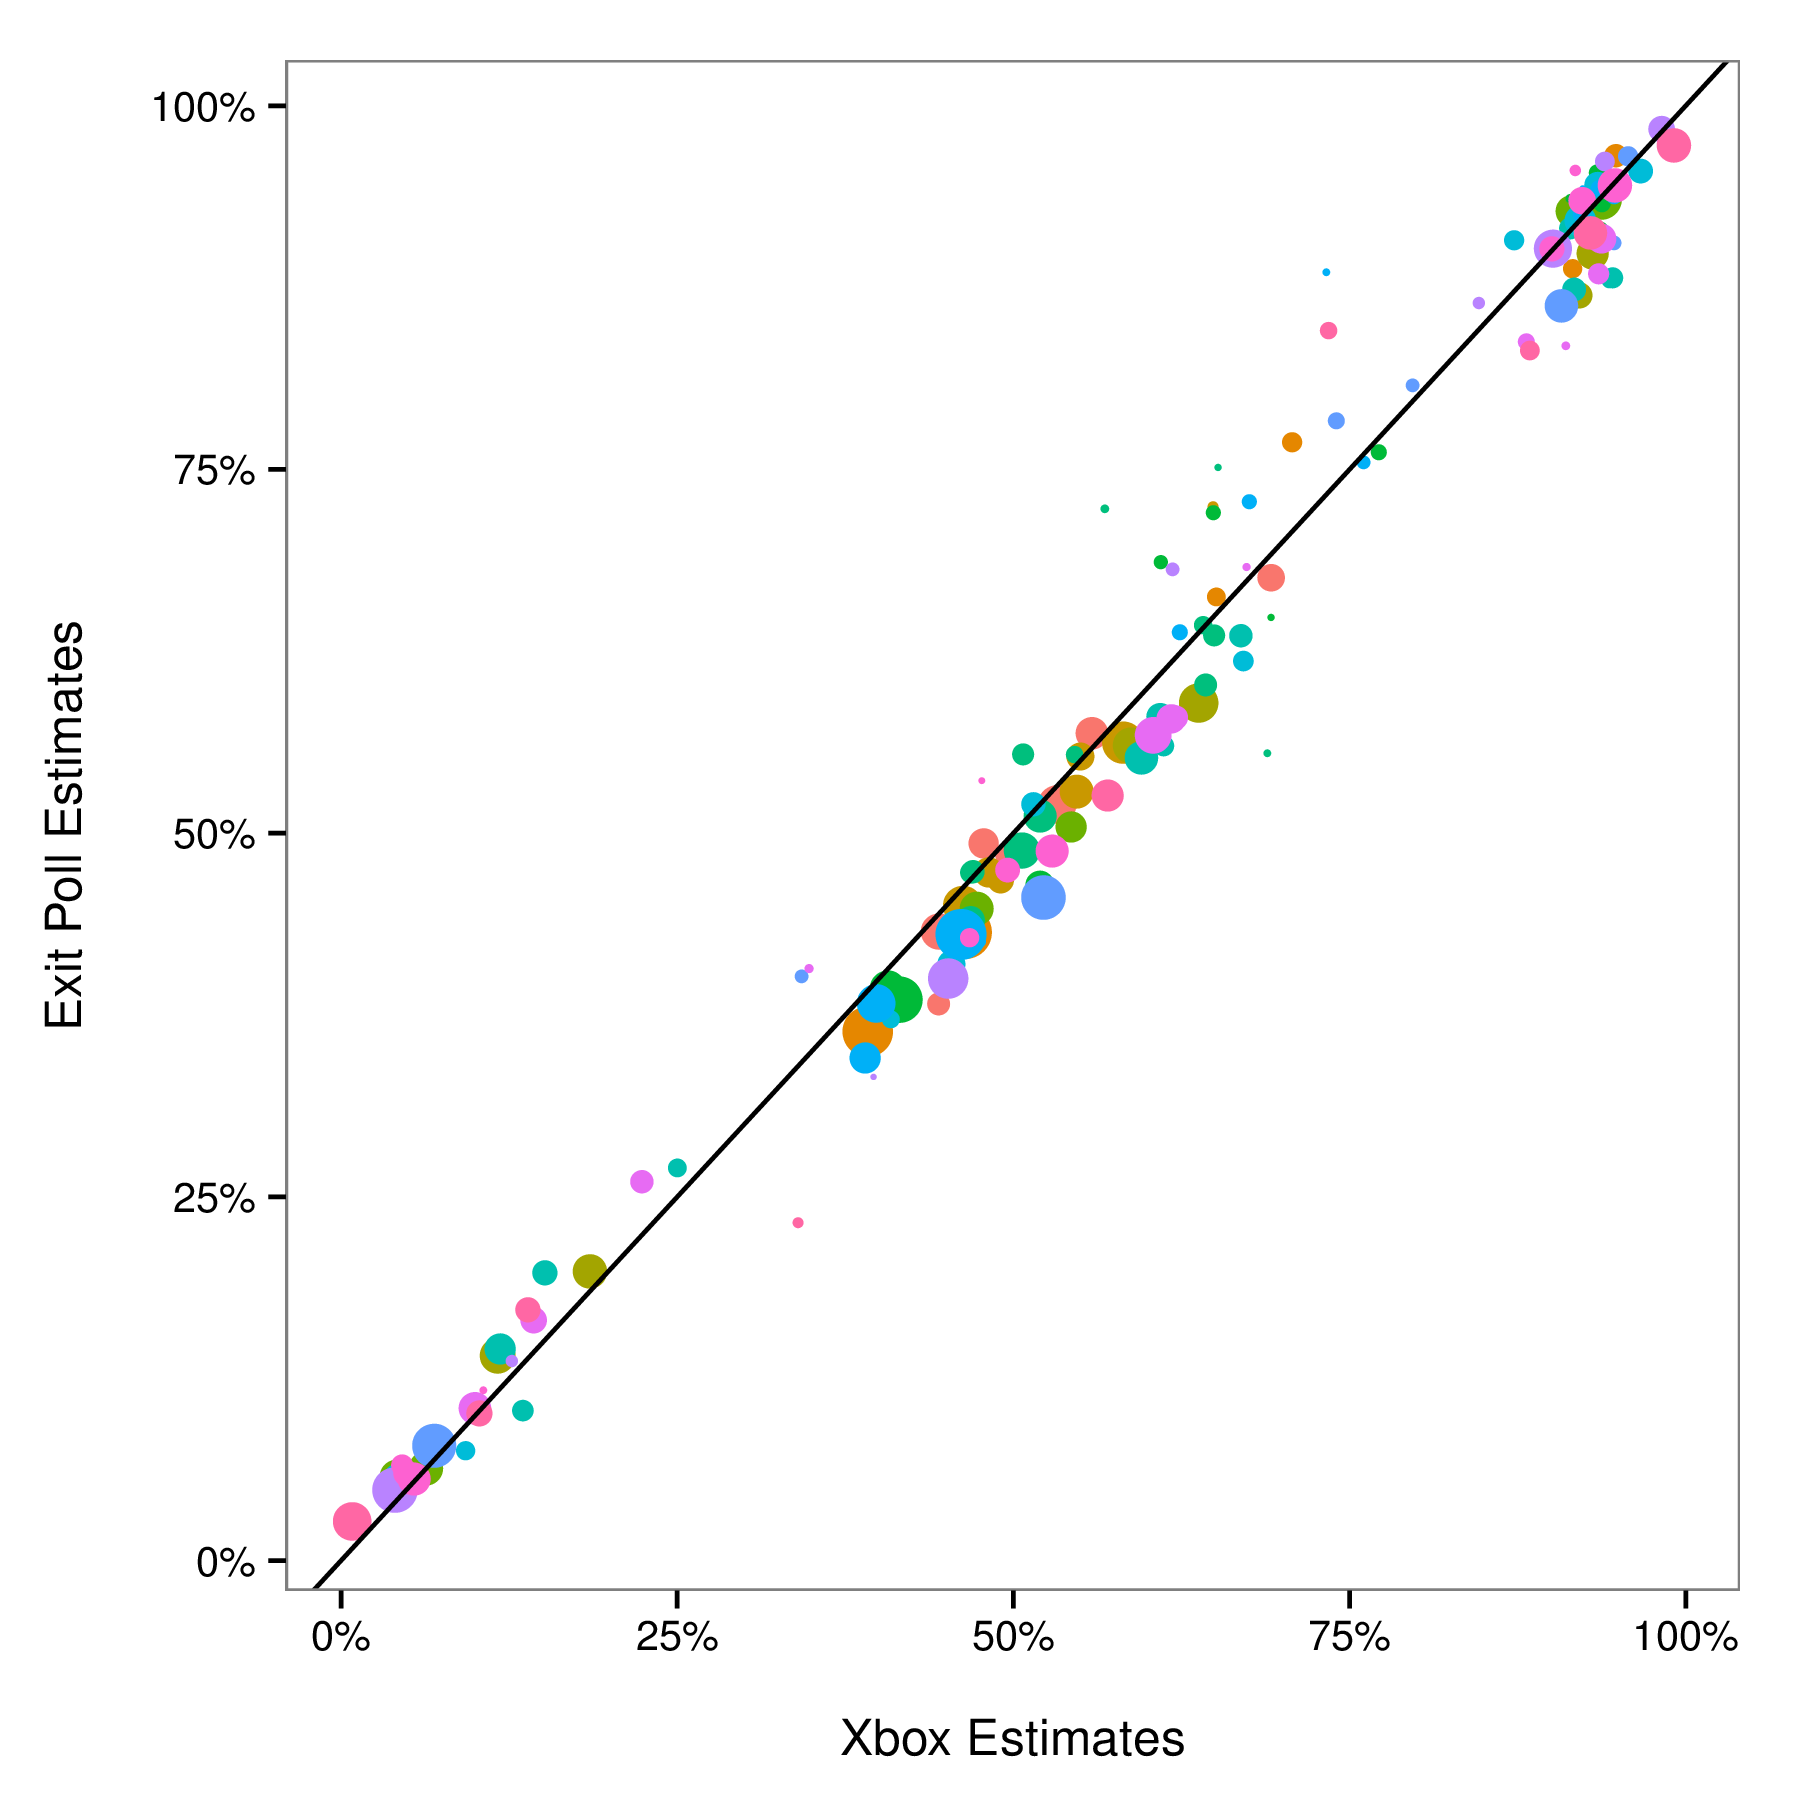 Graph comparing estimates of voter intent for various two-dimensional demographic groups, as inferred via Xbox data and the exit polls.